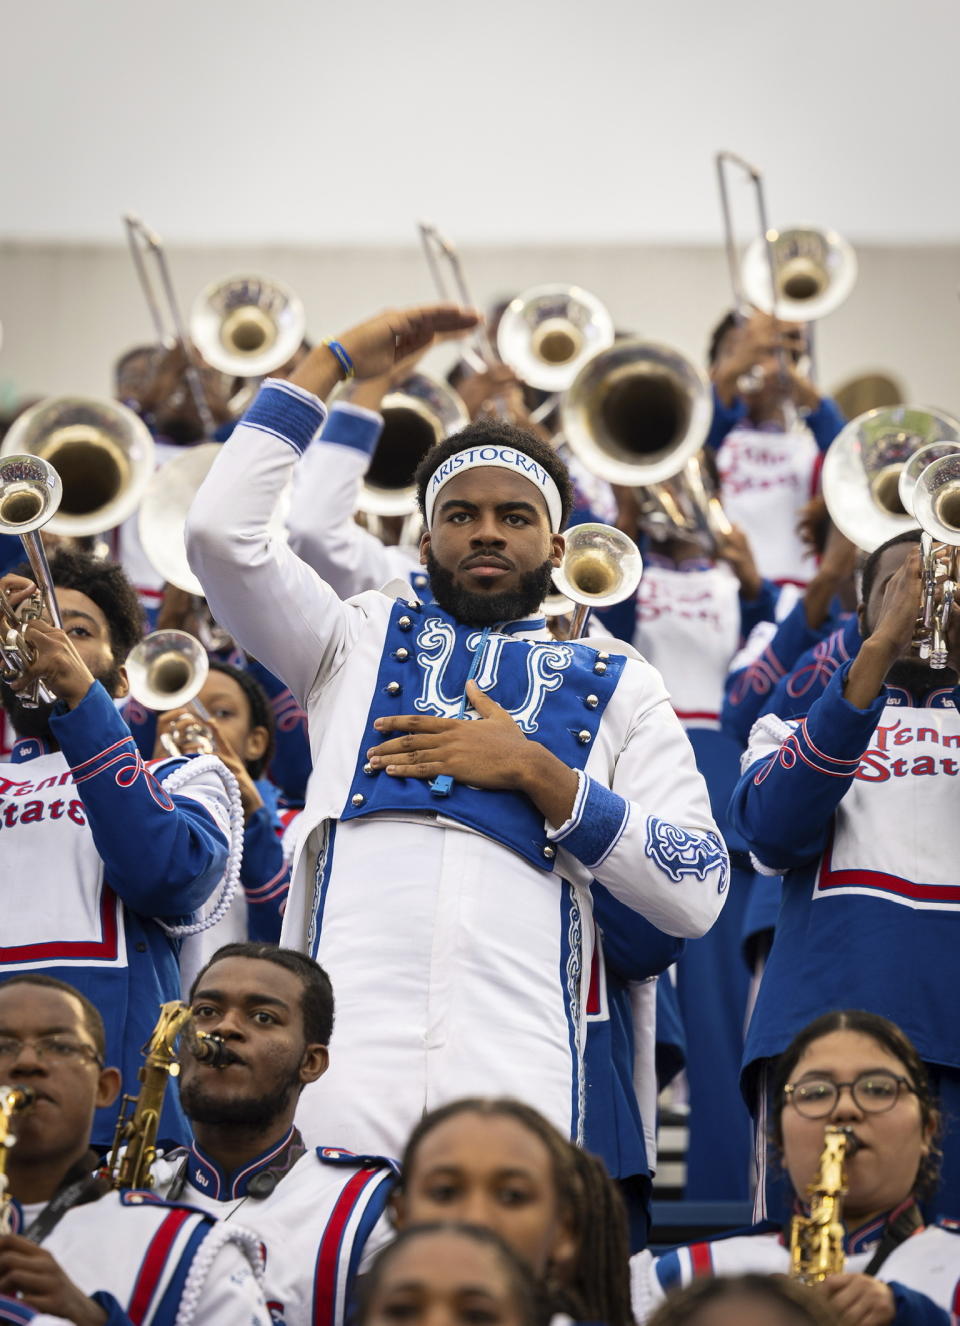 Curtis Olawumi, standing center, appears with other members of the Tennessee State University marching band, during the Southern Heritage Classic football game in Memphis, Tenn., on Sept. 10, 2022. TSU is hoping to make history after their marching band was nominated for a Grammy in the roots gospel category. The historically Black university's Aristocrat of Bands teamed up with gospel songwriter and producer Sir the Baptist last year to record “The Urban Hymnal.” (Garrett E Morris via AP)